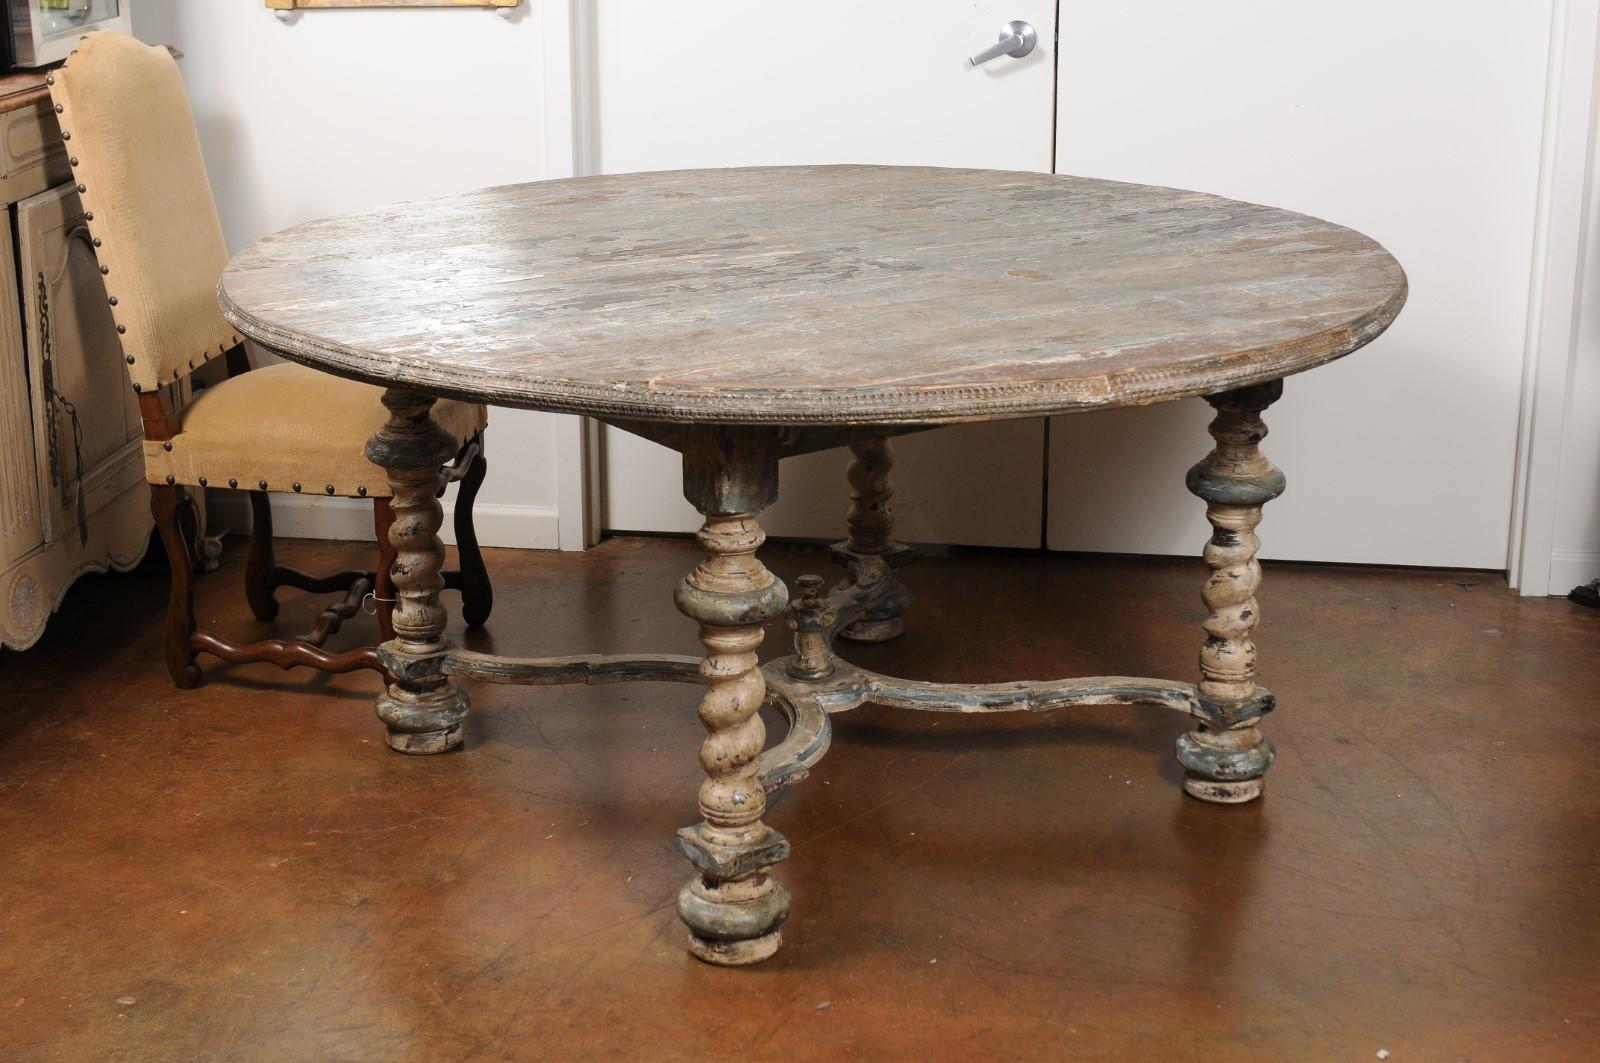 Italian Baroque Style Dining Room Table with Barley Twist Legs and Stretcher 1